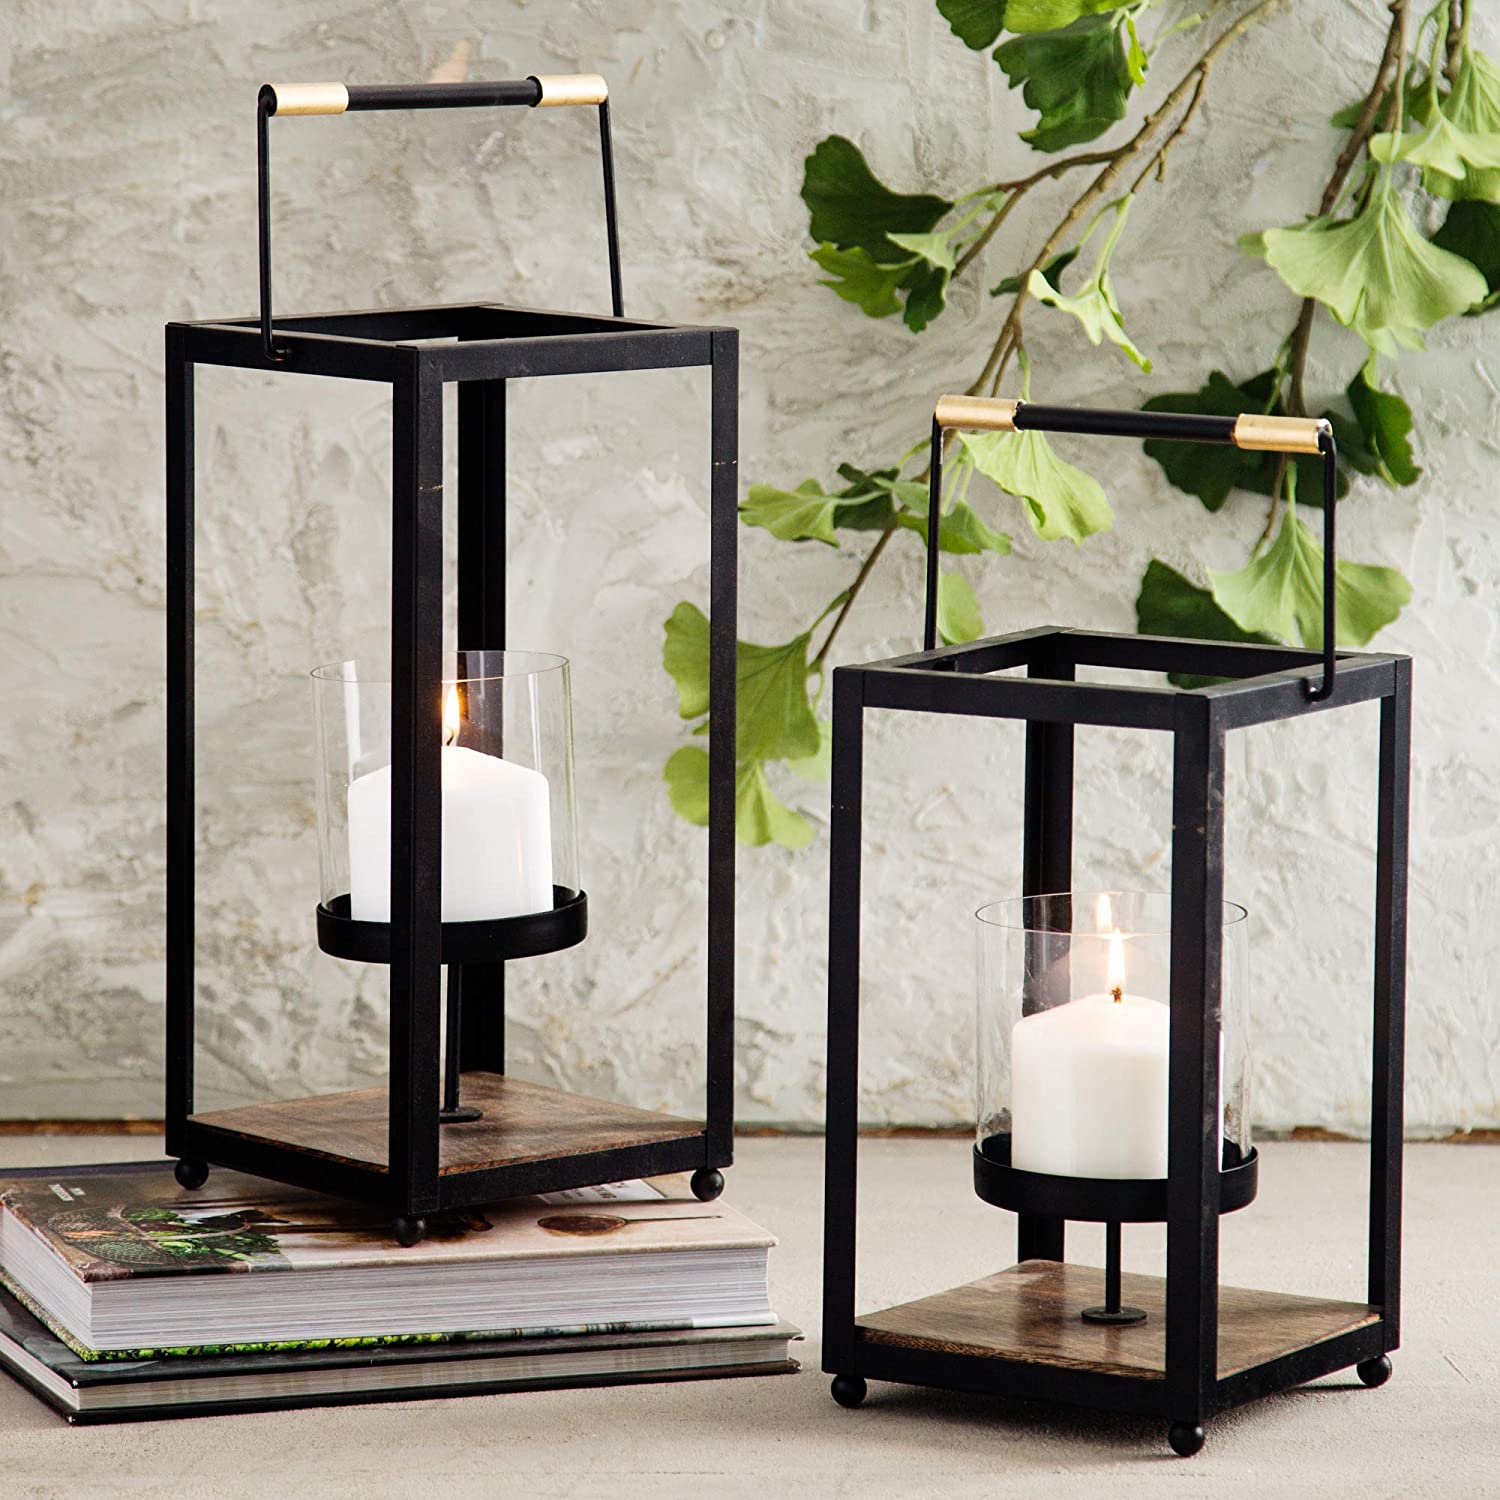 https://www.ekrhome.com/single-decorative-metal-candle-lantern-13-candle-holder-with-glass-insert-and-wooden-base-ideal-for-table-centerpieces-banquet-wedding-decor-party-classic-patio-lantern-product/